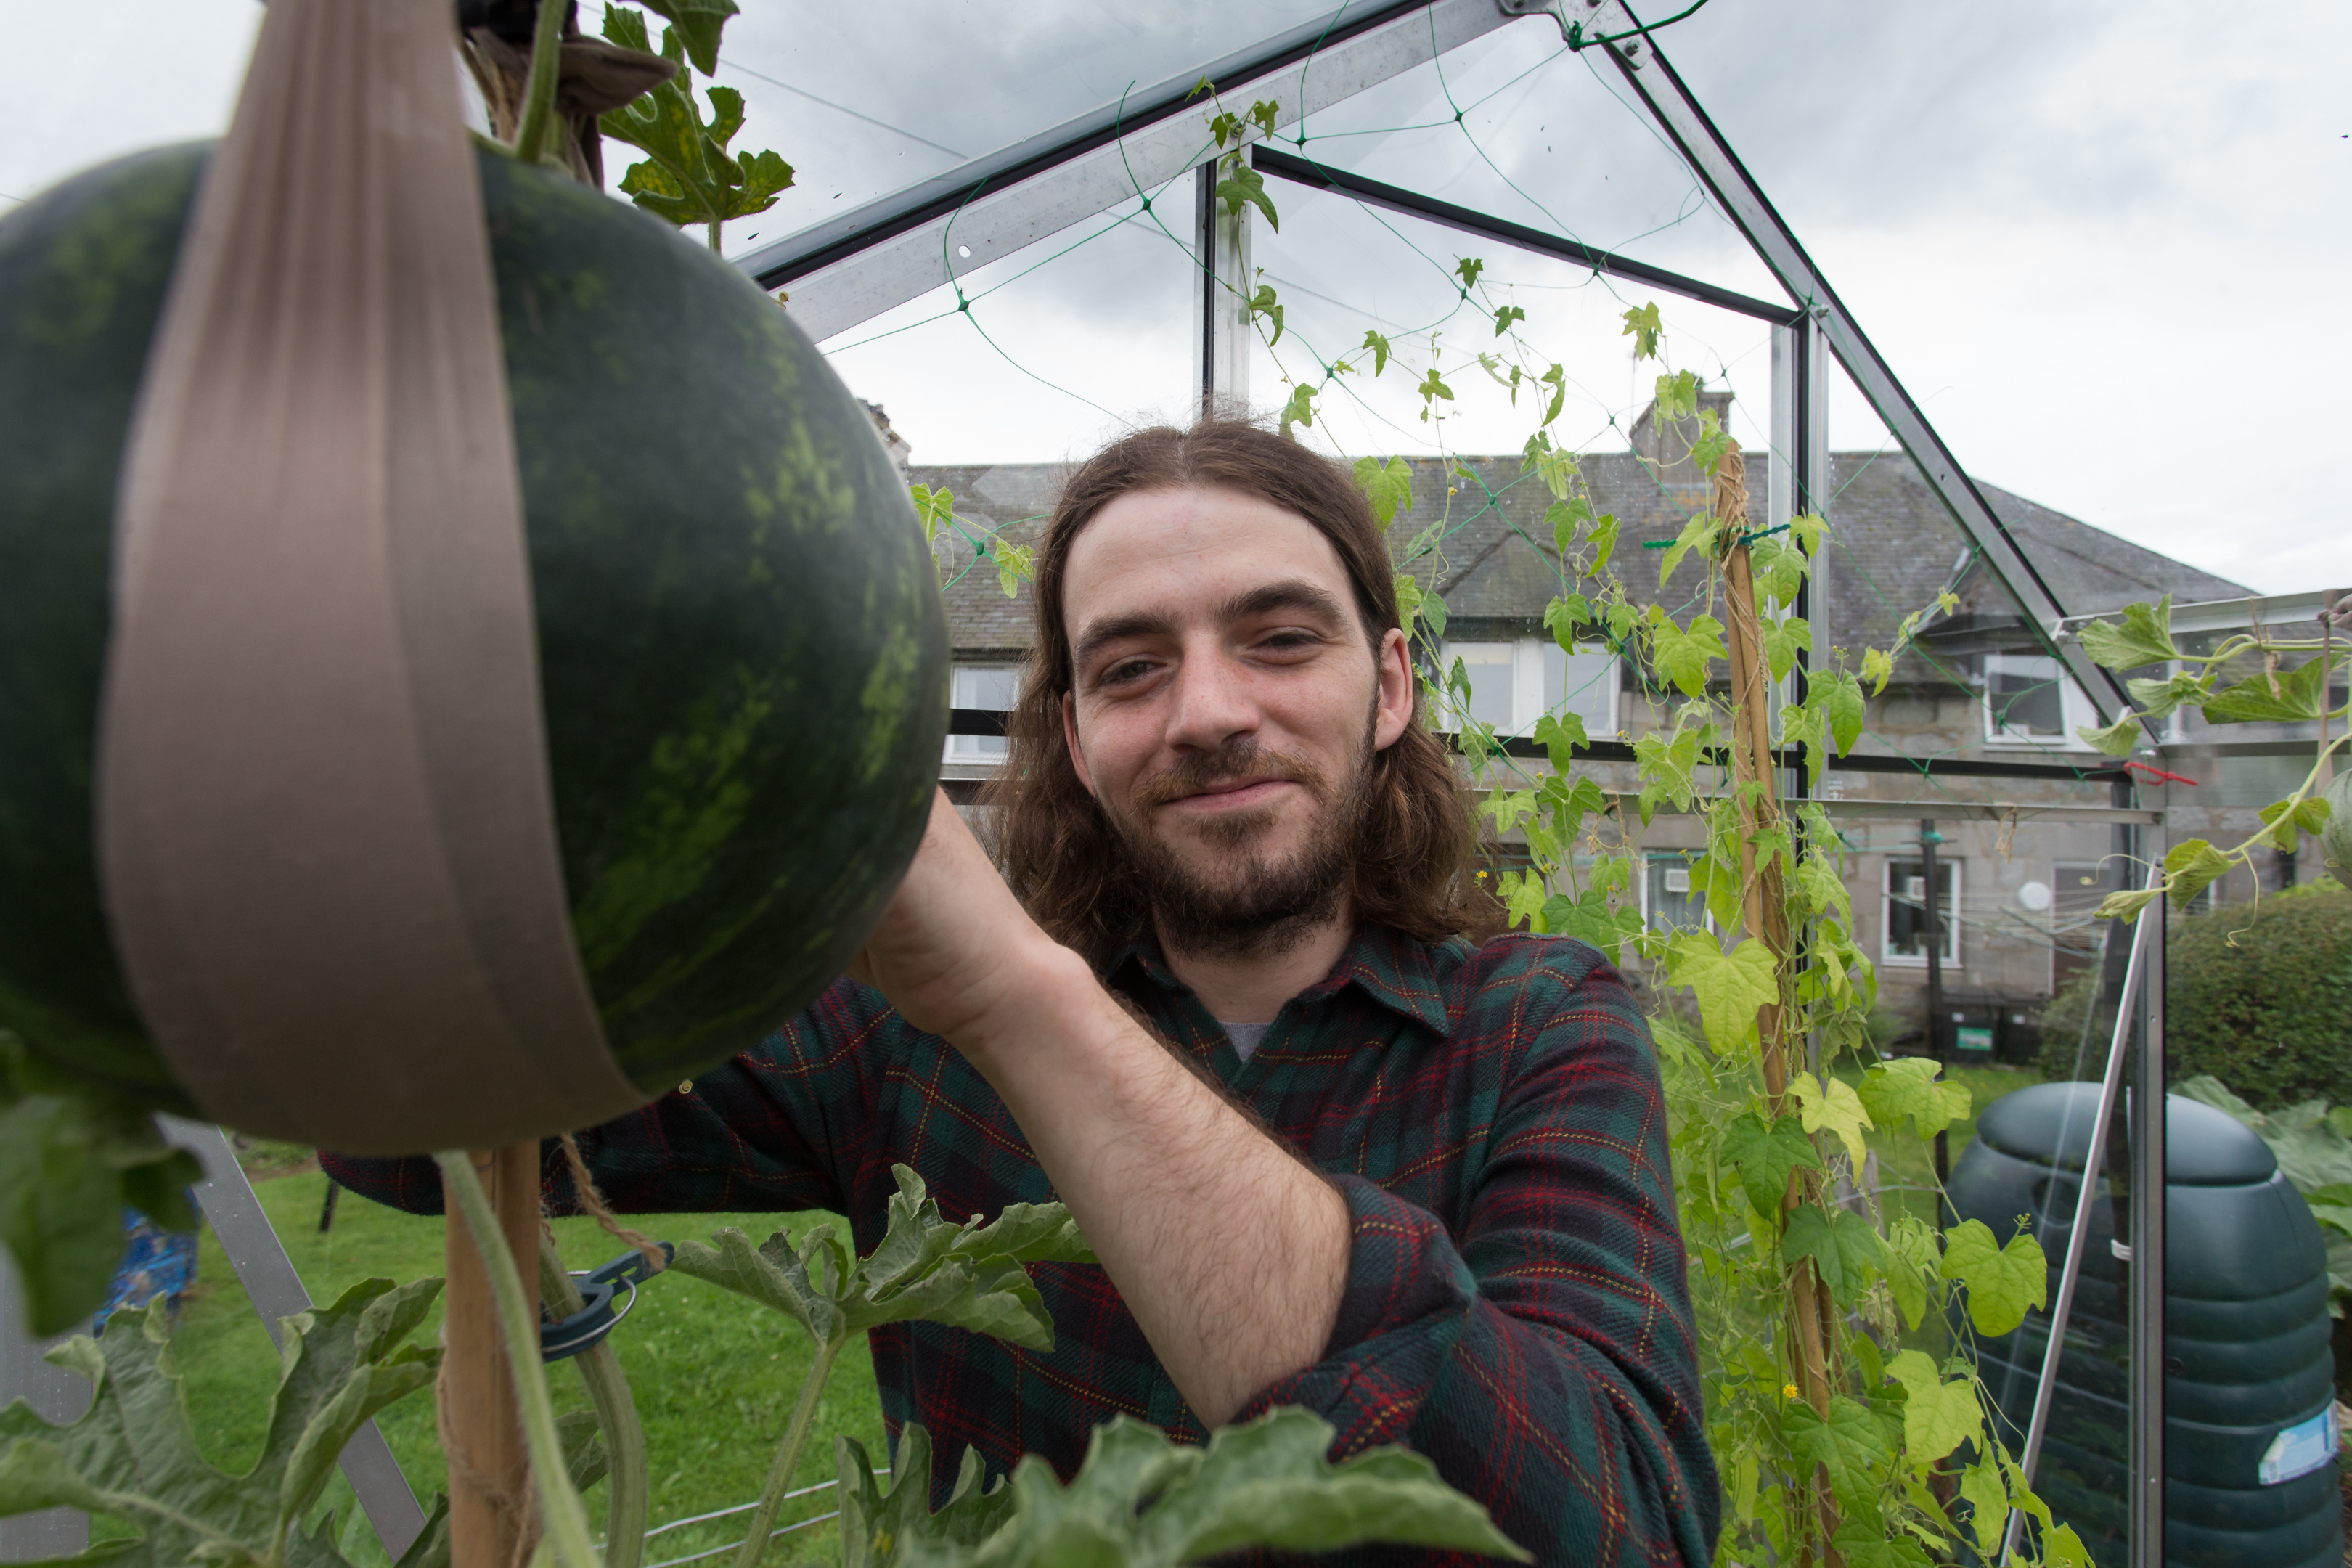 Who would have thought that Peterculter was a tropical paradise. Ford Yule 29, from Peterculter, Aberdeenshire, is taking the horticultural world by storm. (Ross Johnston/Newsline Media)